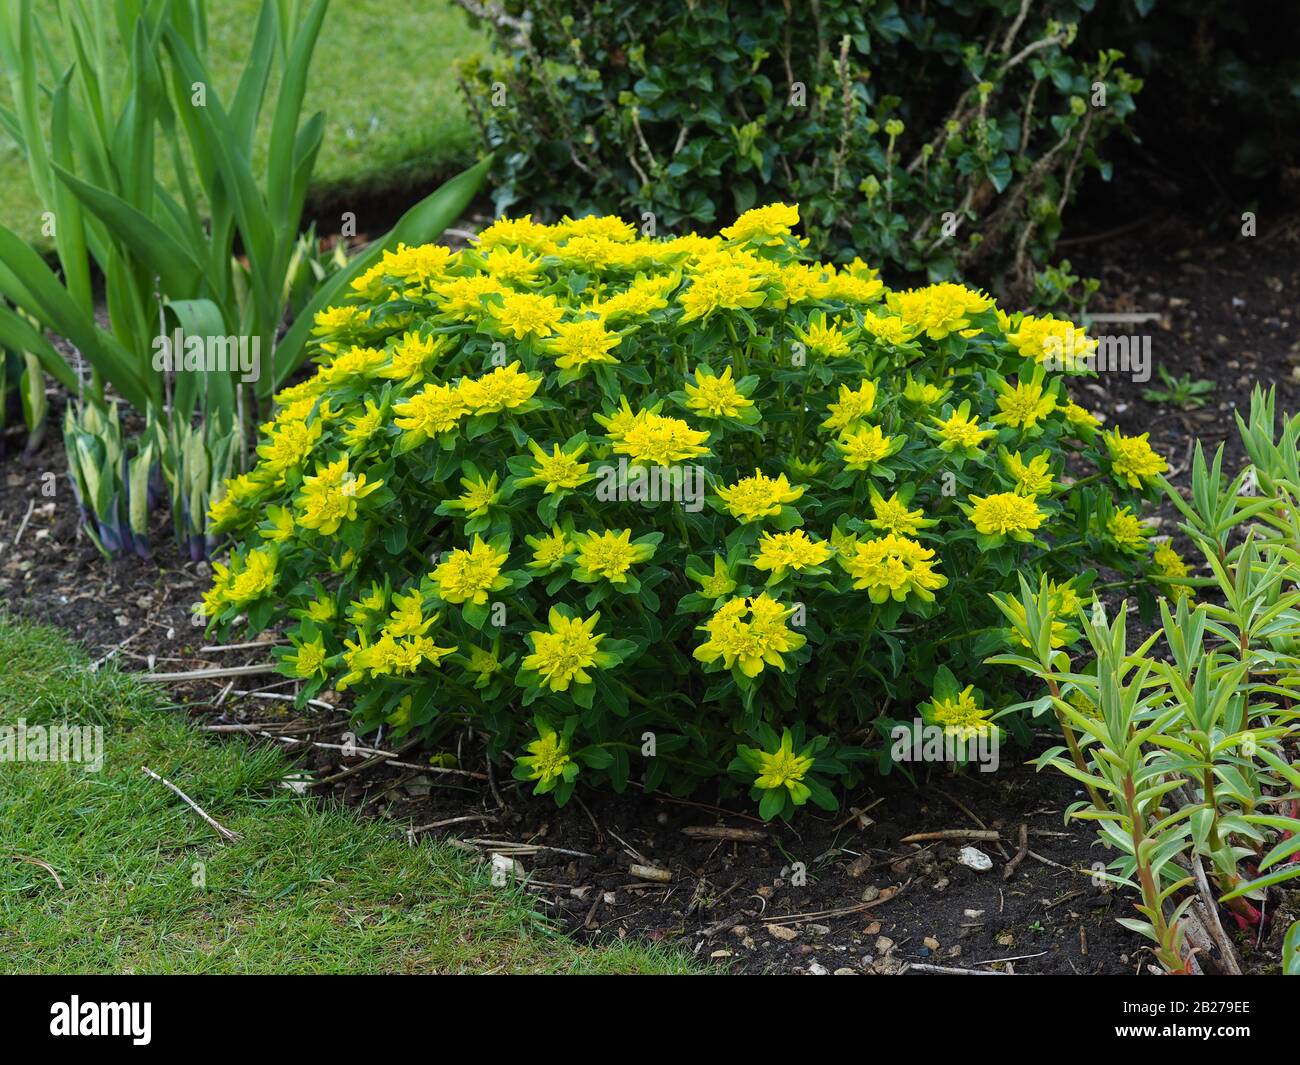 Euphorbia polychroma plant with yellow flowers and green leaves in a garden Stock Photo